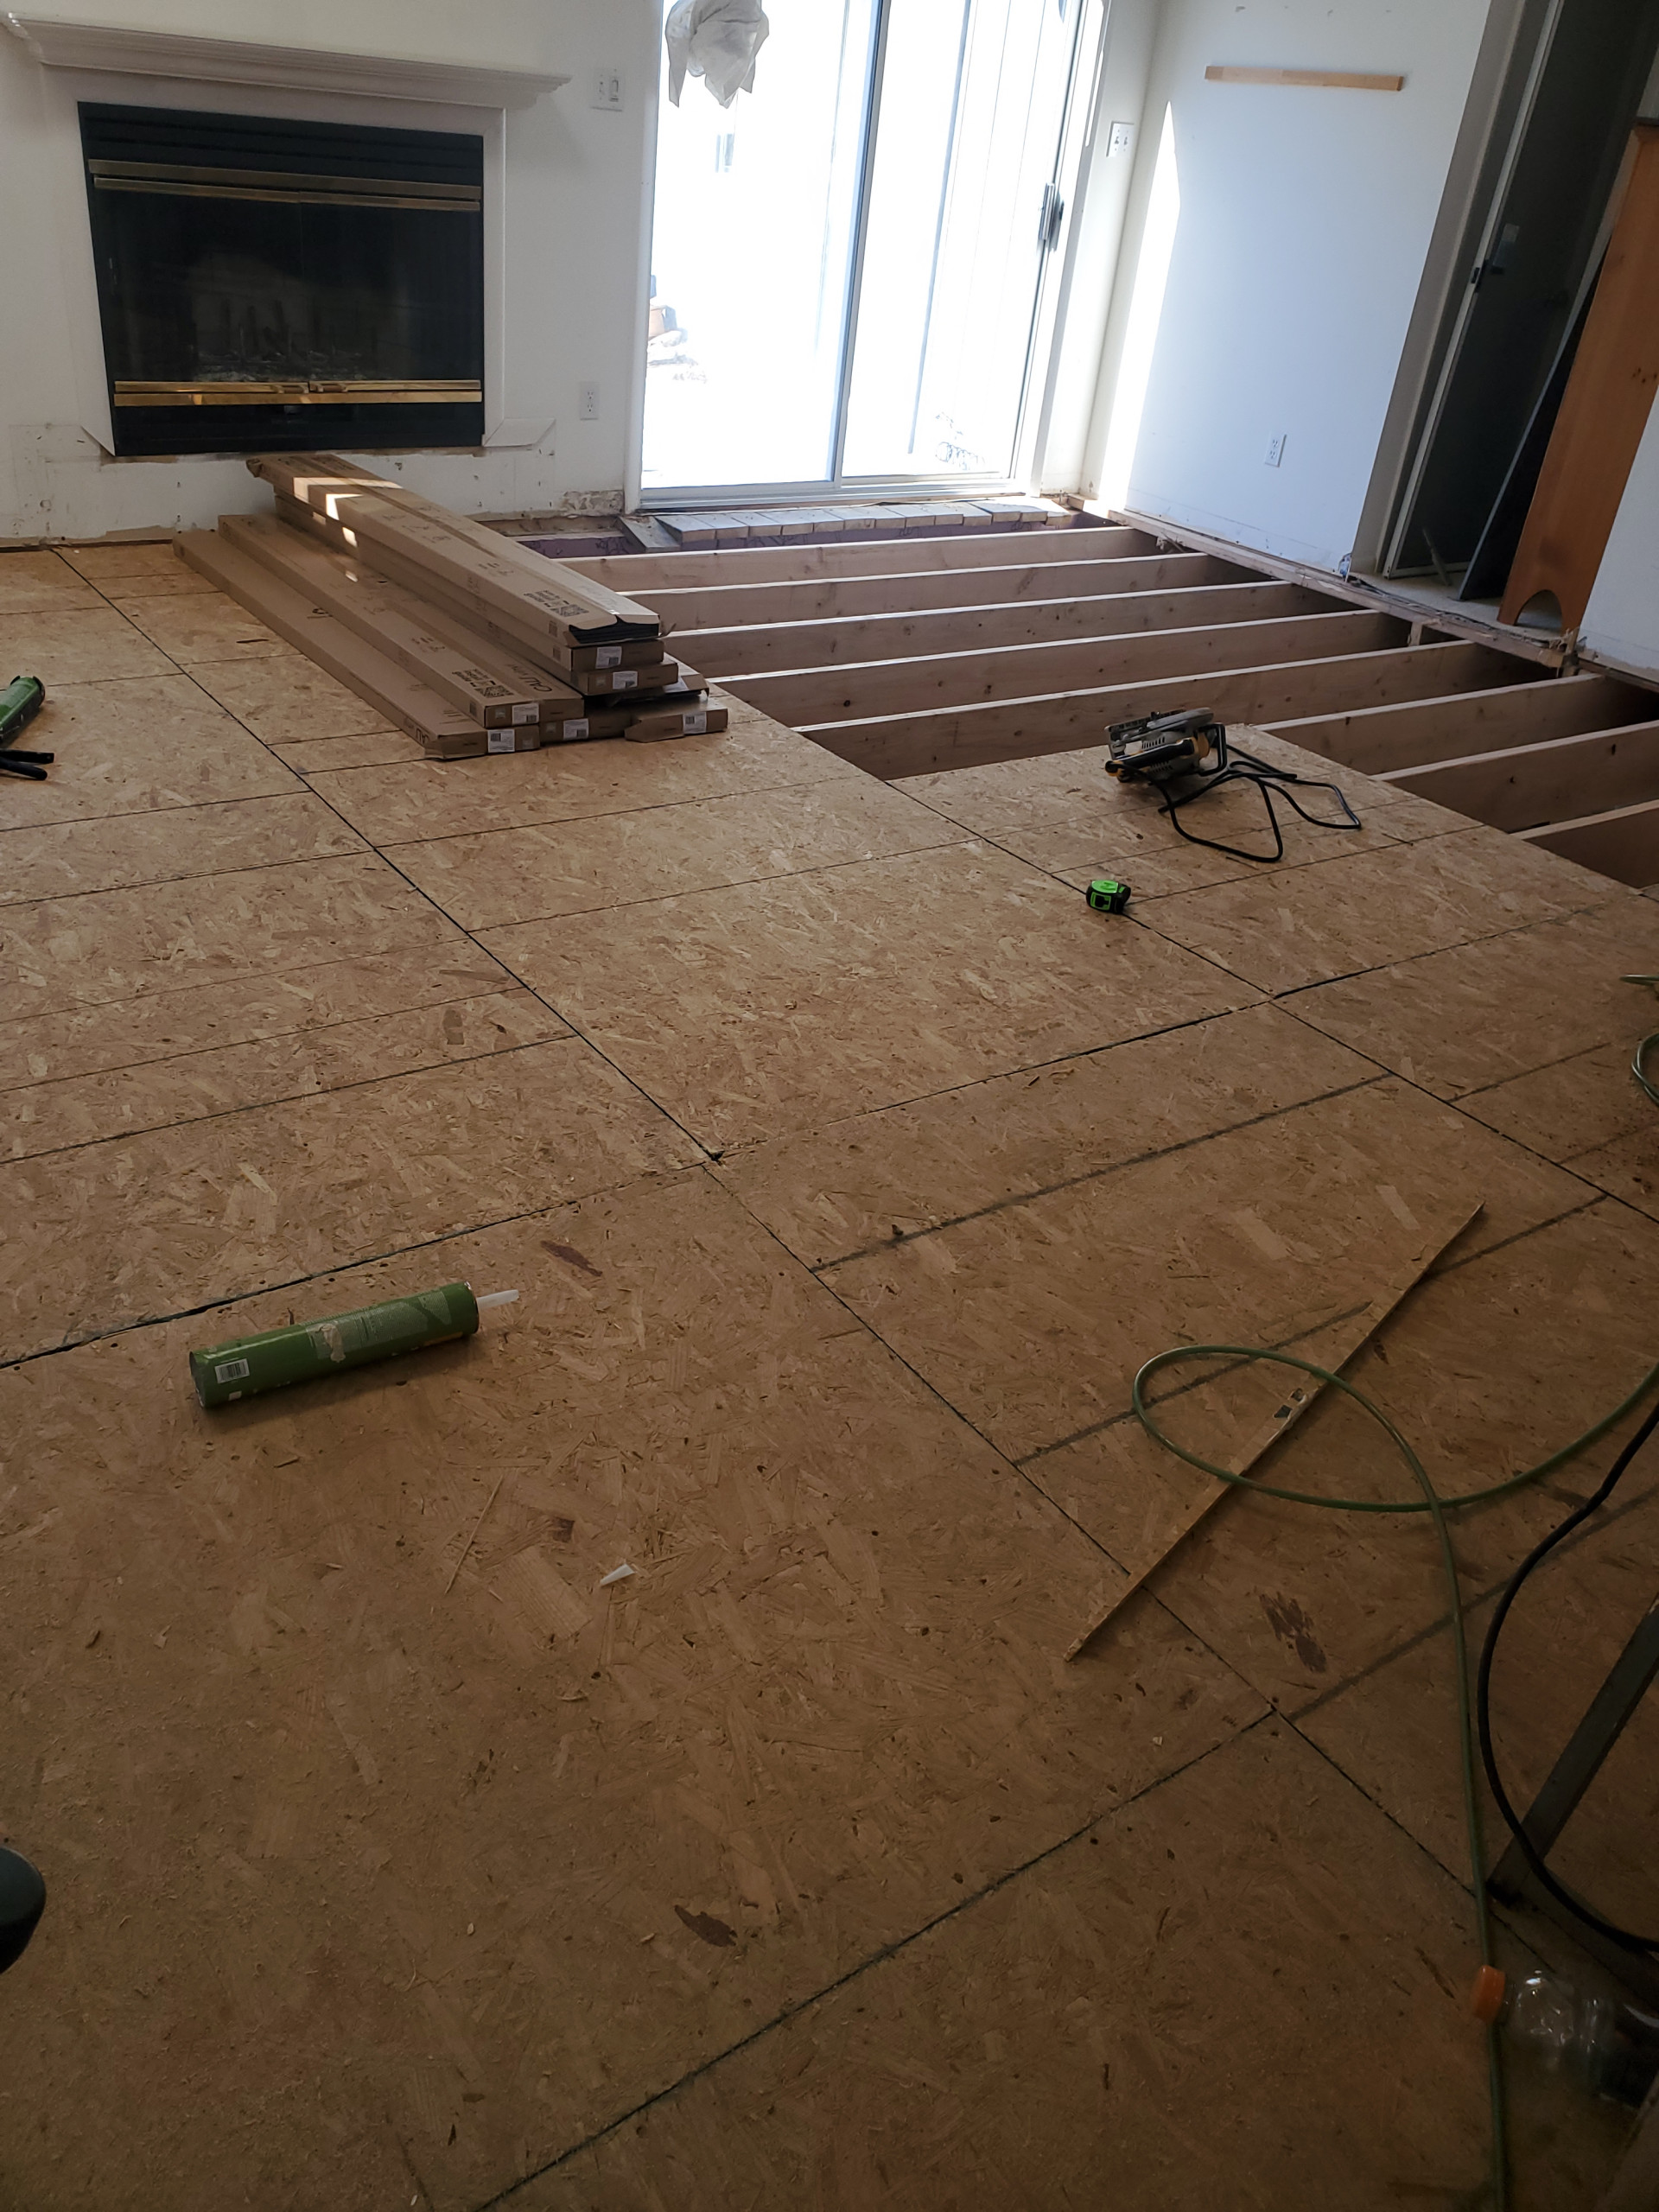 House jacked up 3 inches, new floors, joists, and main beams 2023